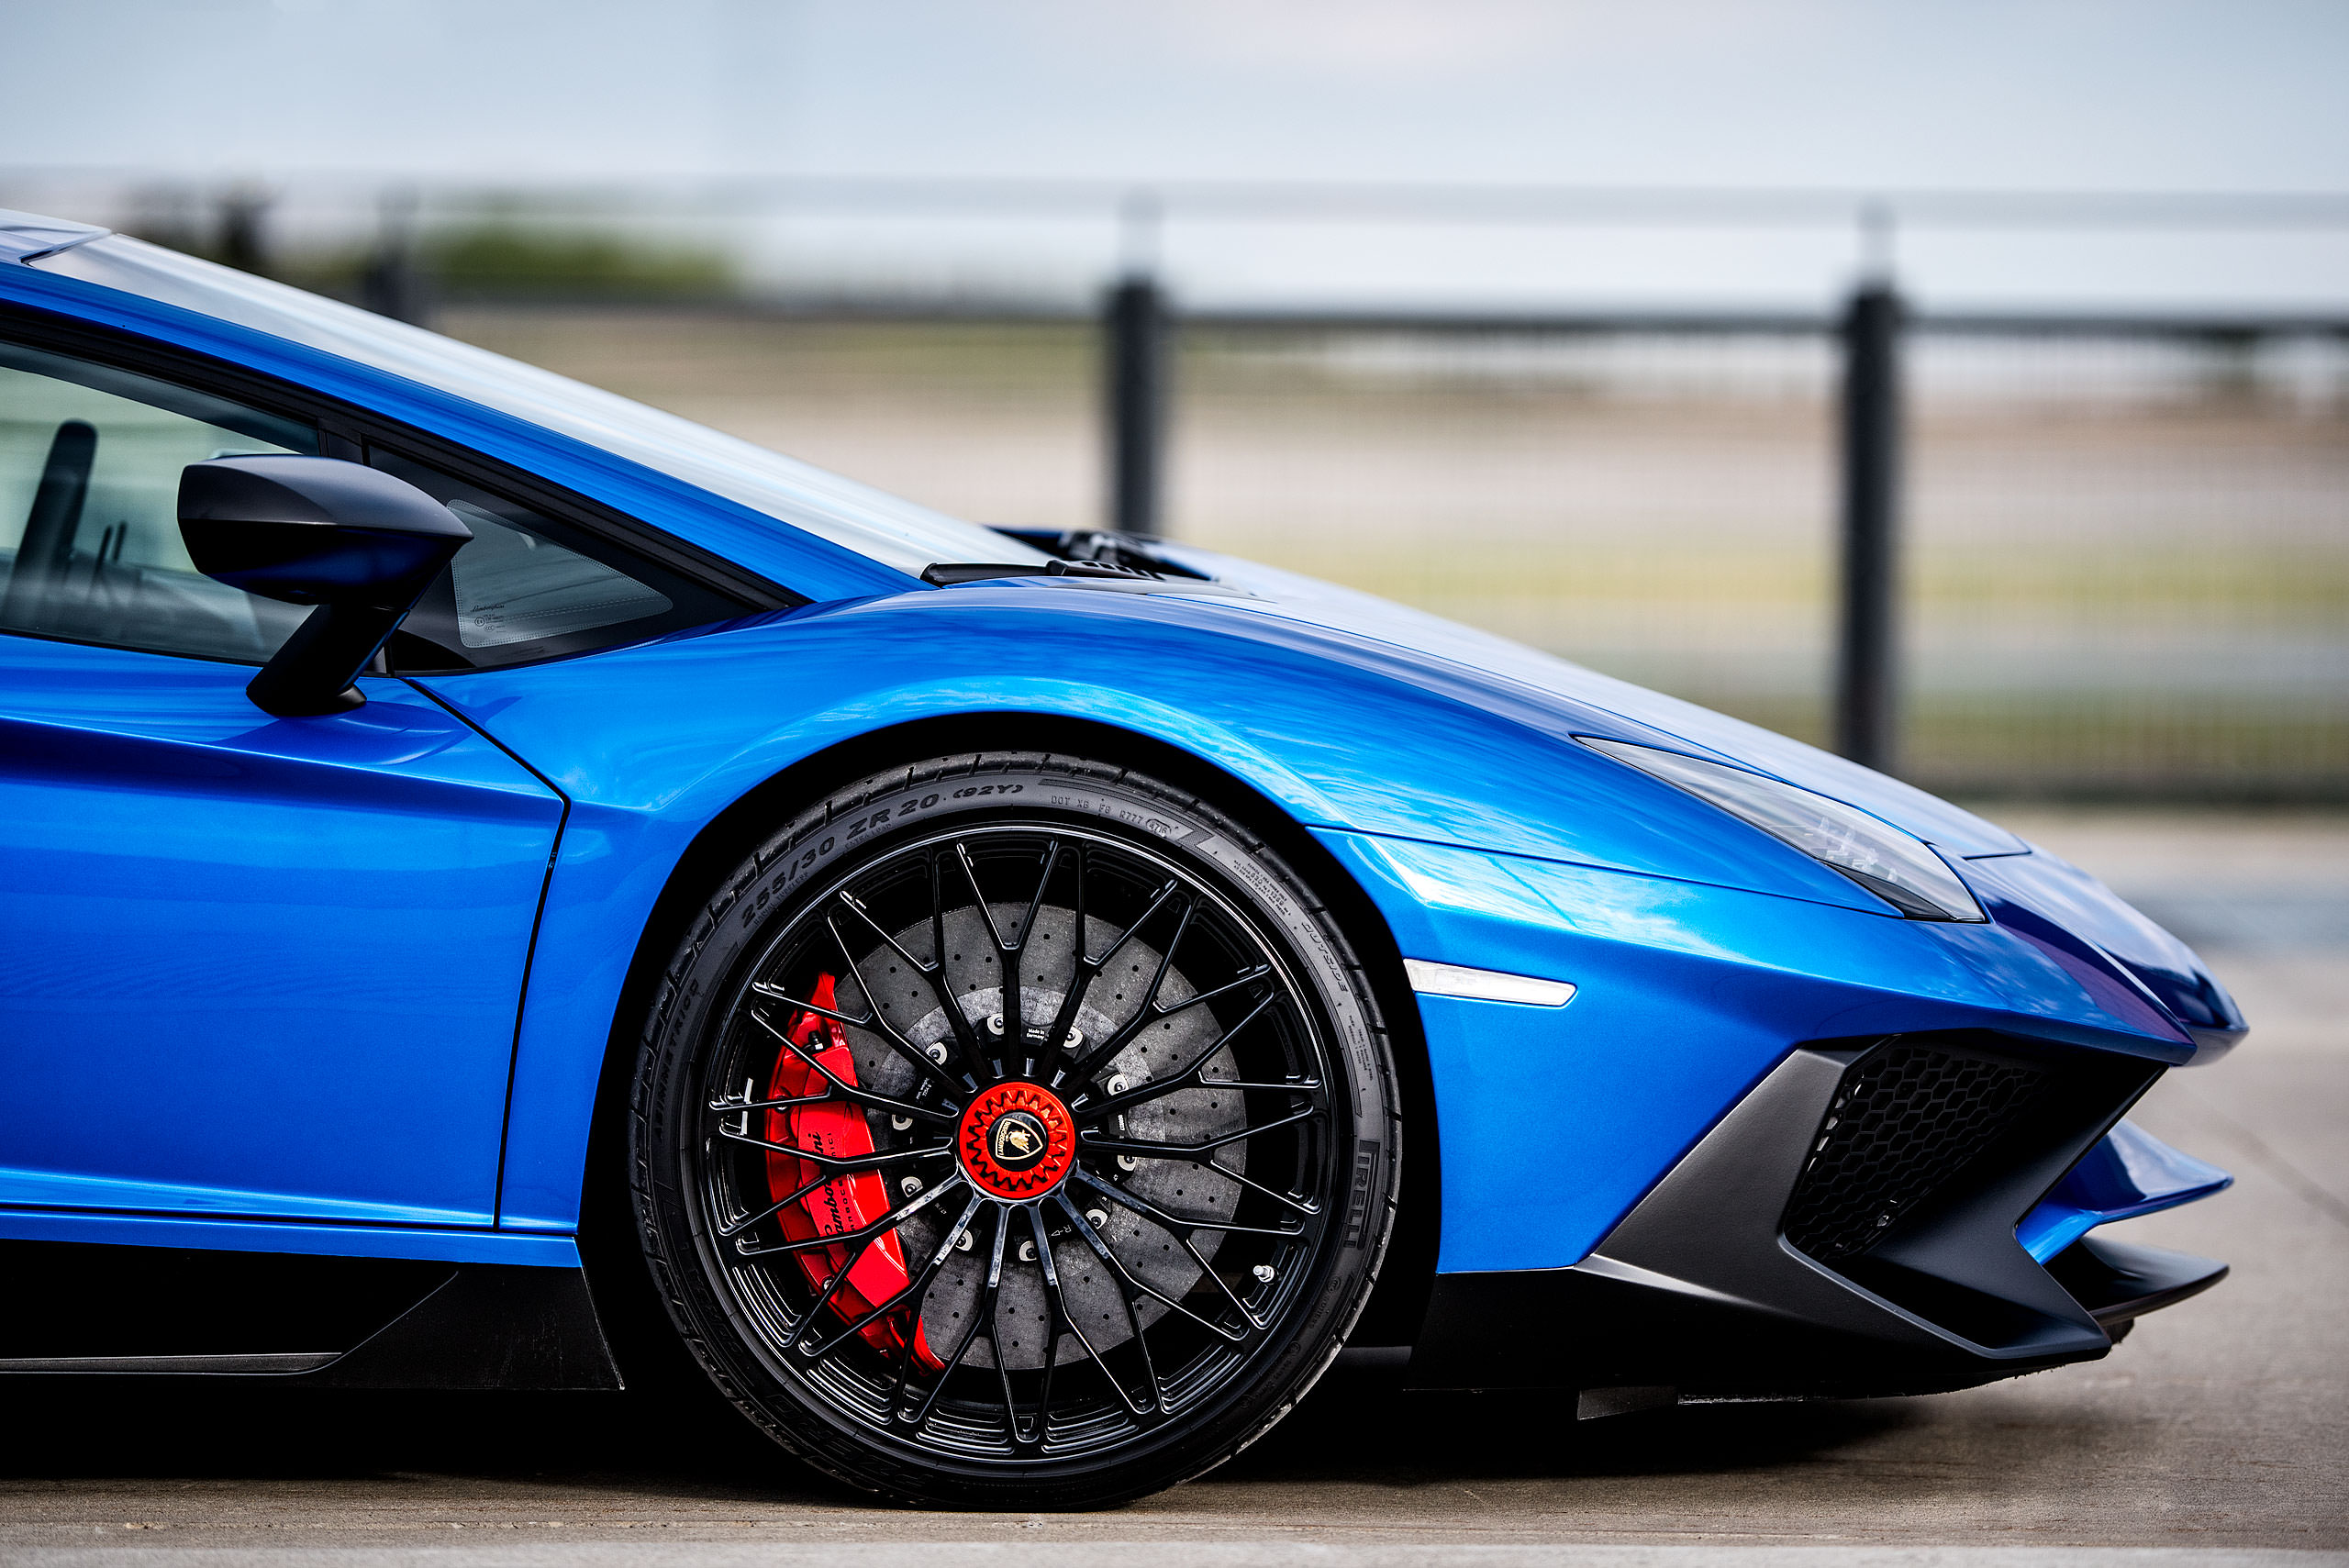 metallic blue Lamborghini aventador with the doors open parked on a road